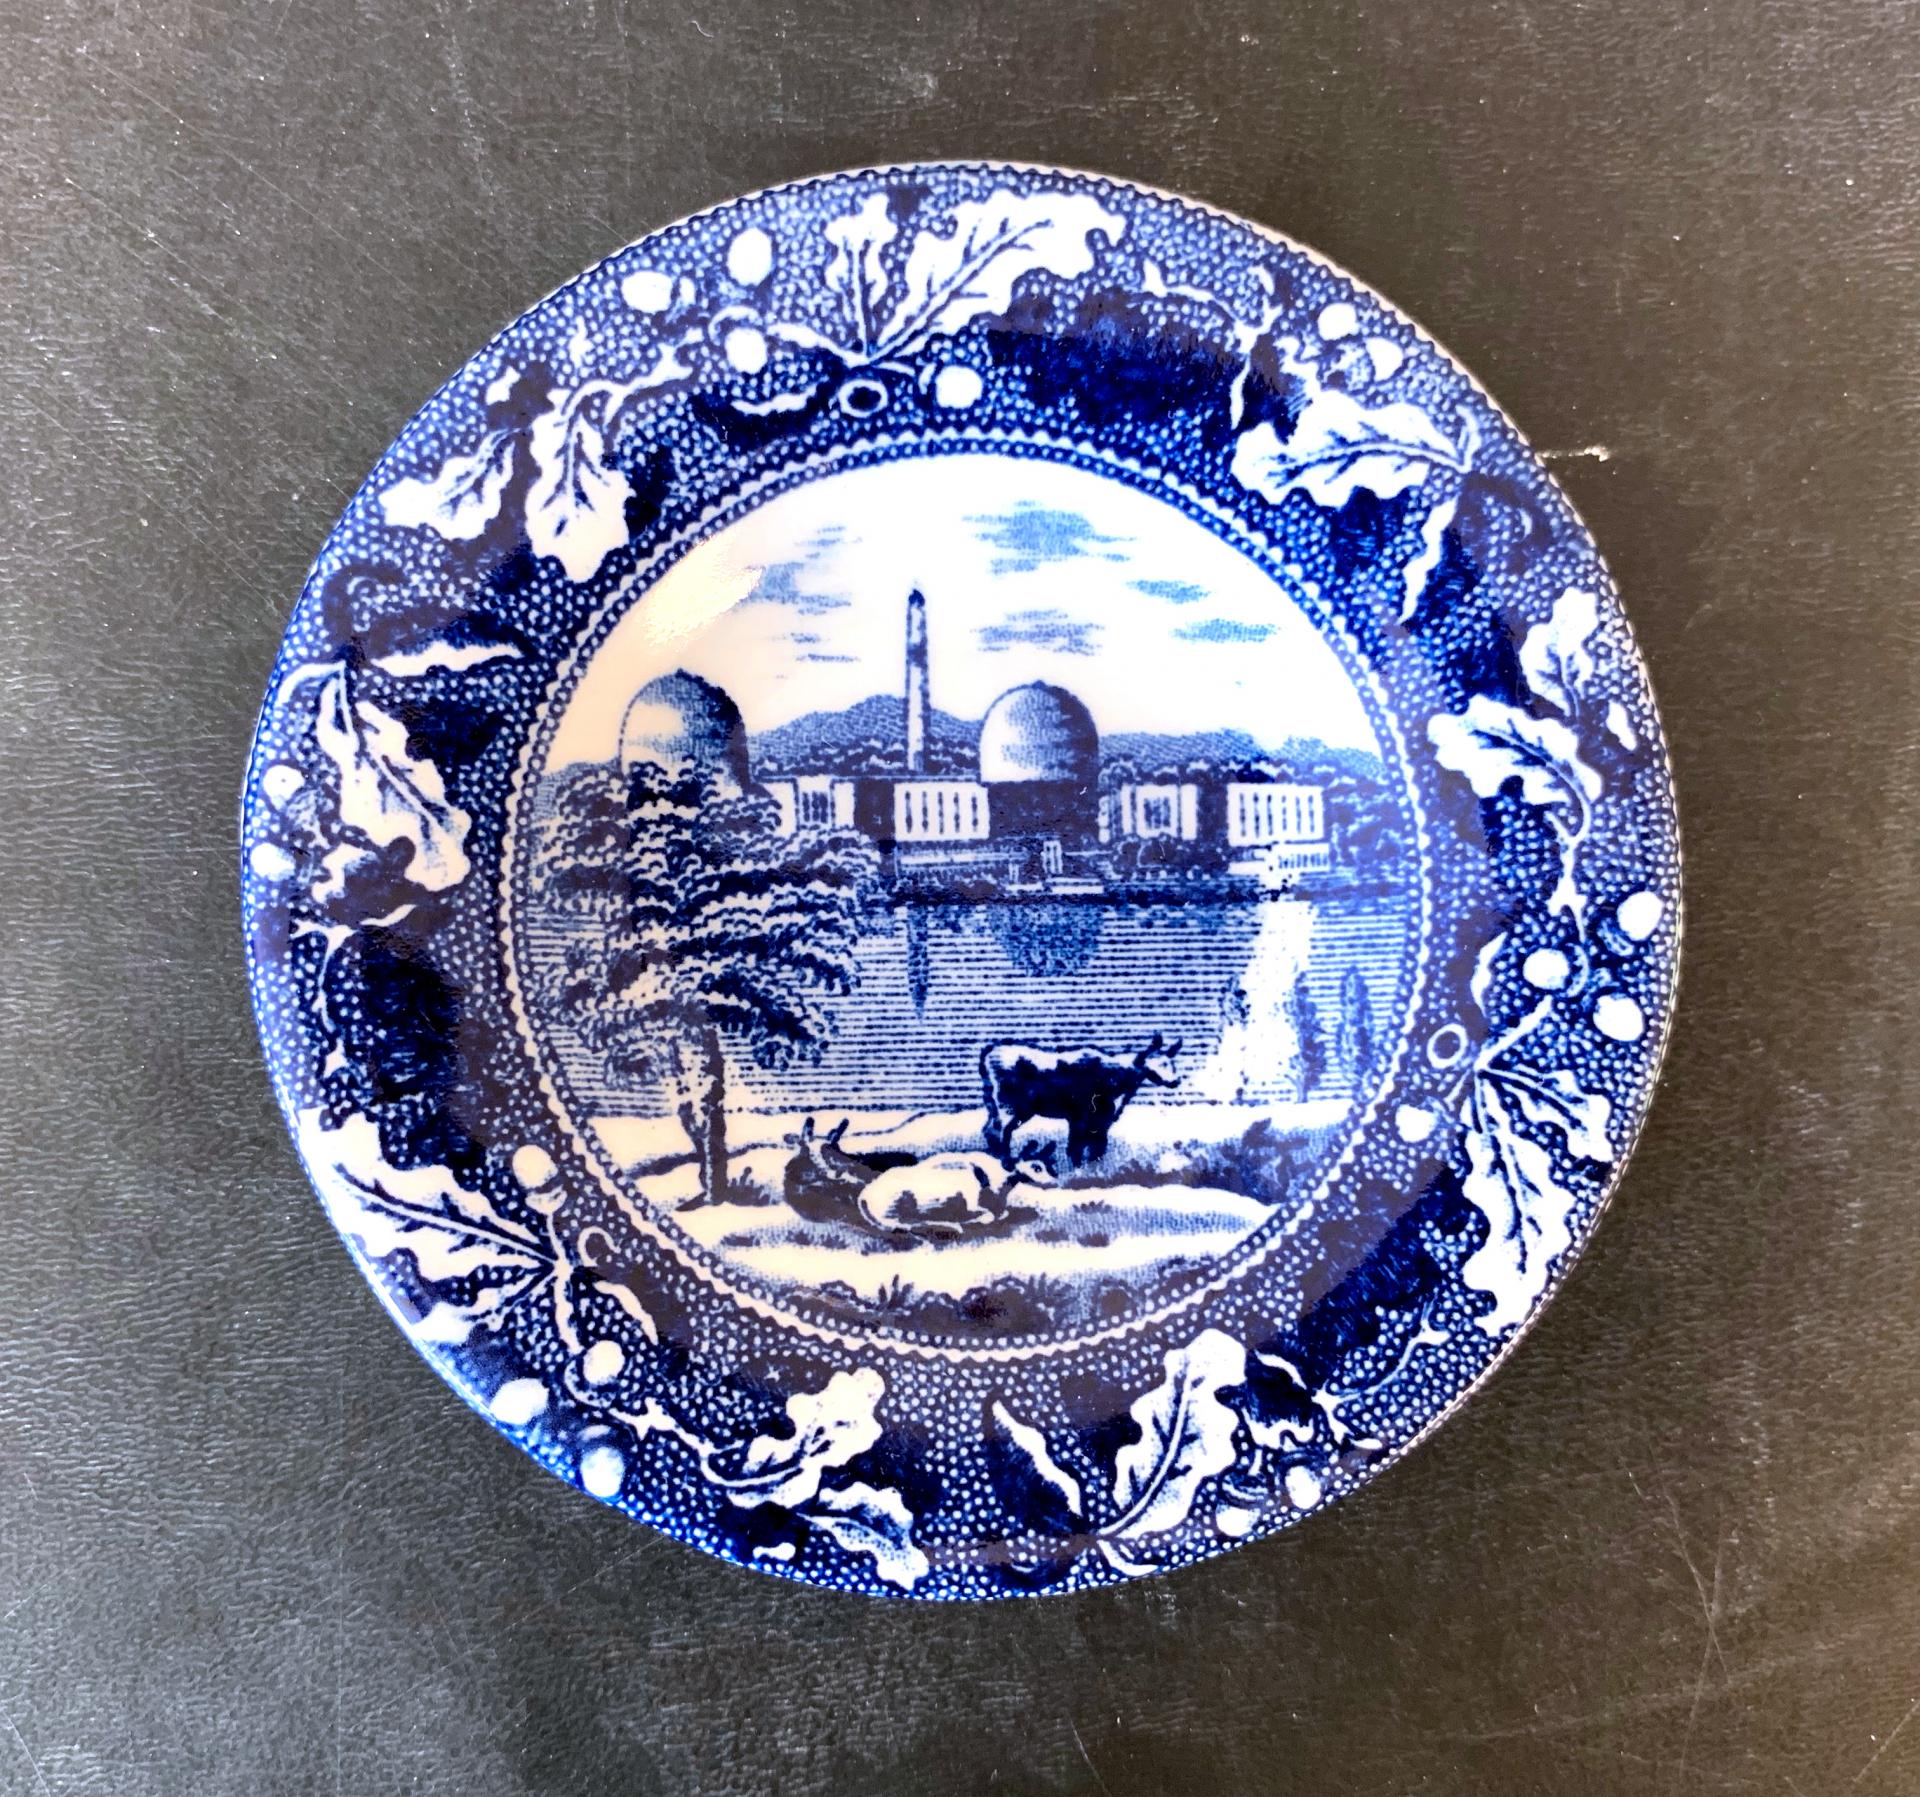 blue and white transferware cup plate depicting a the indian point nuclear power plant and cows, with an oak leaf border